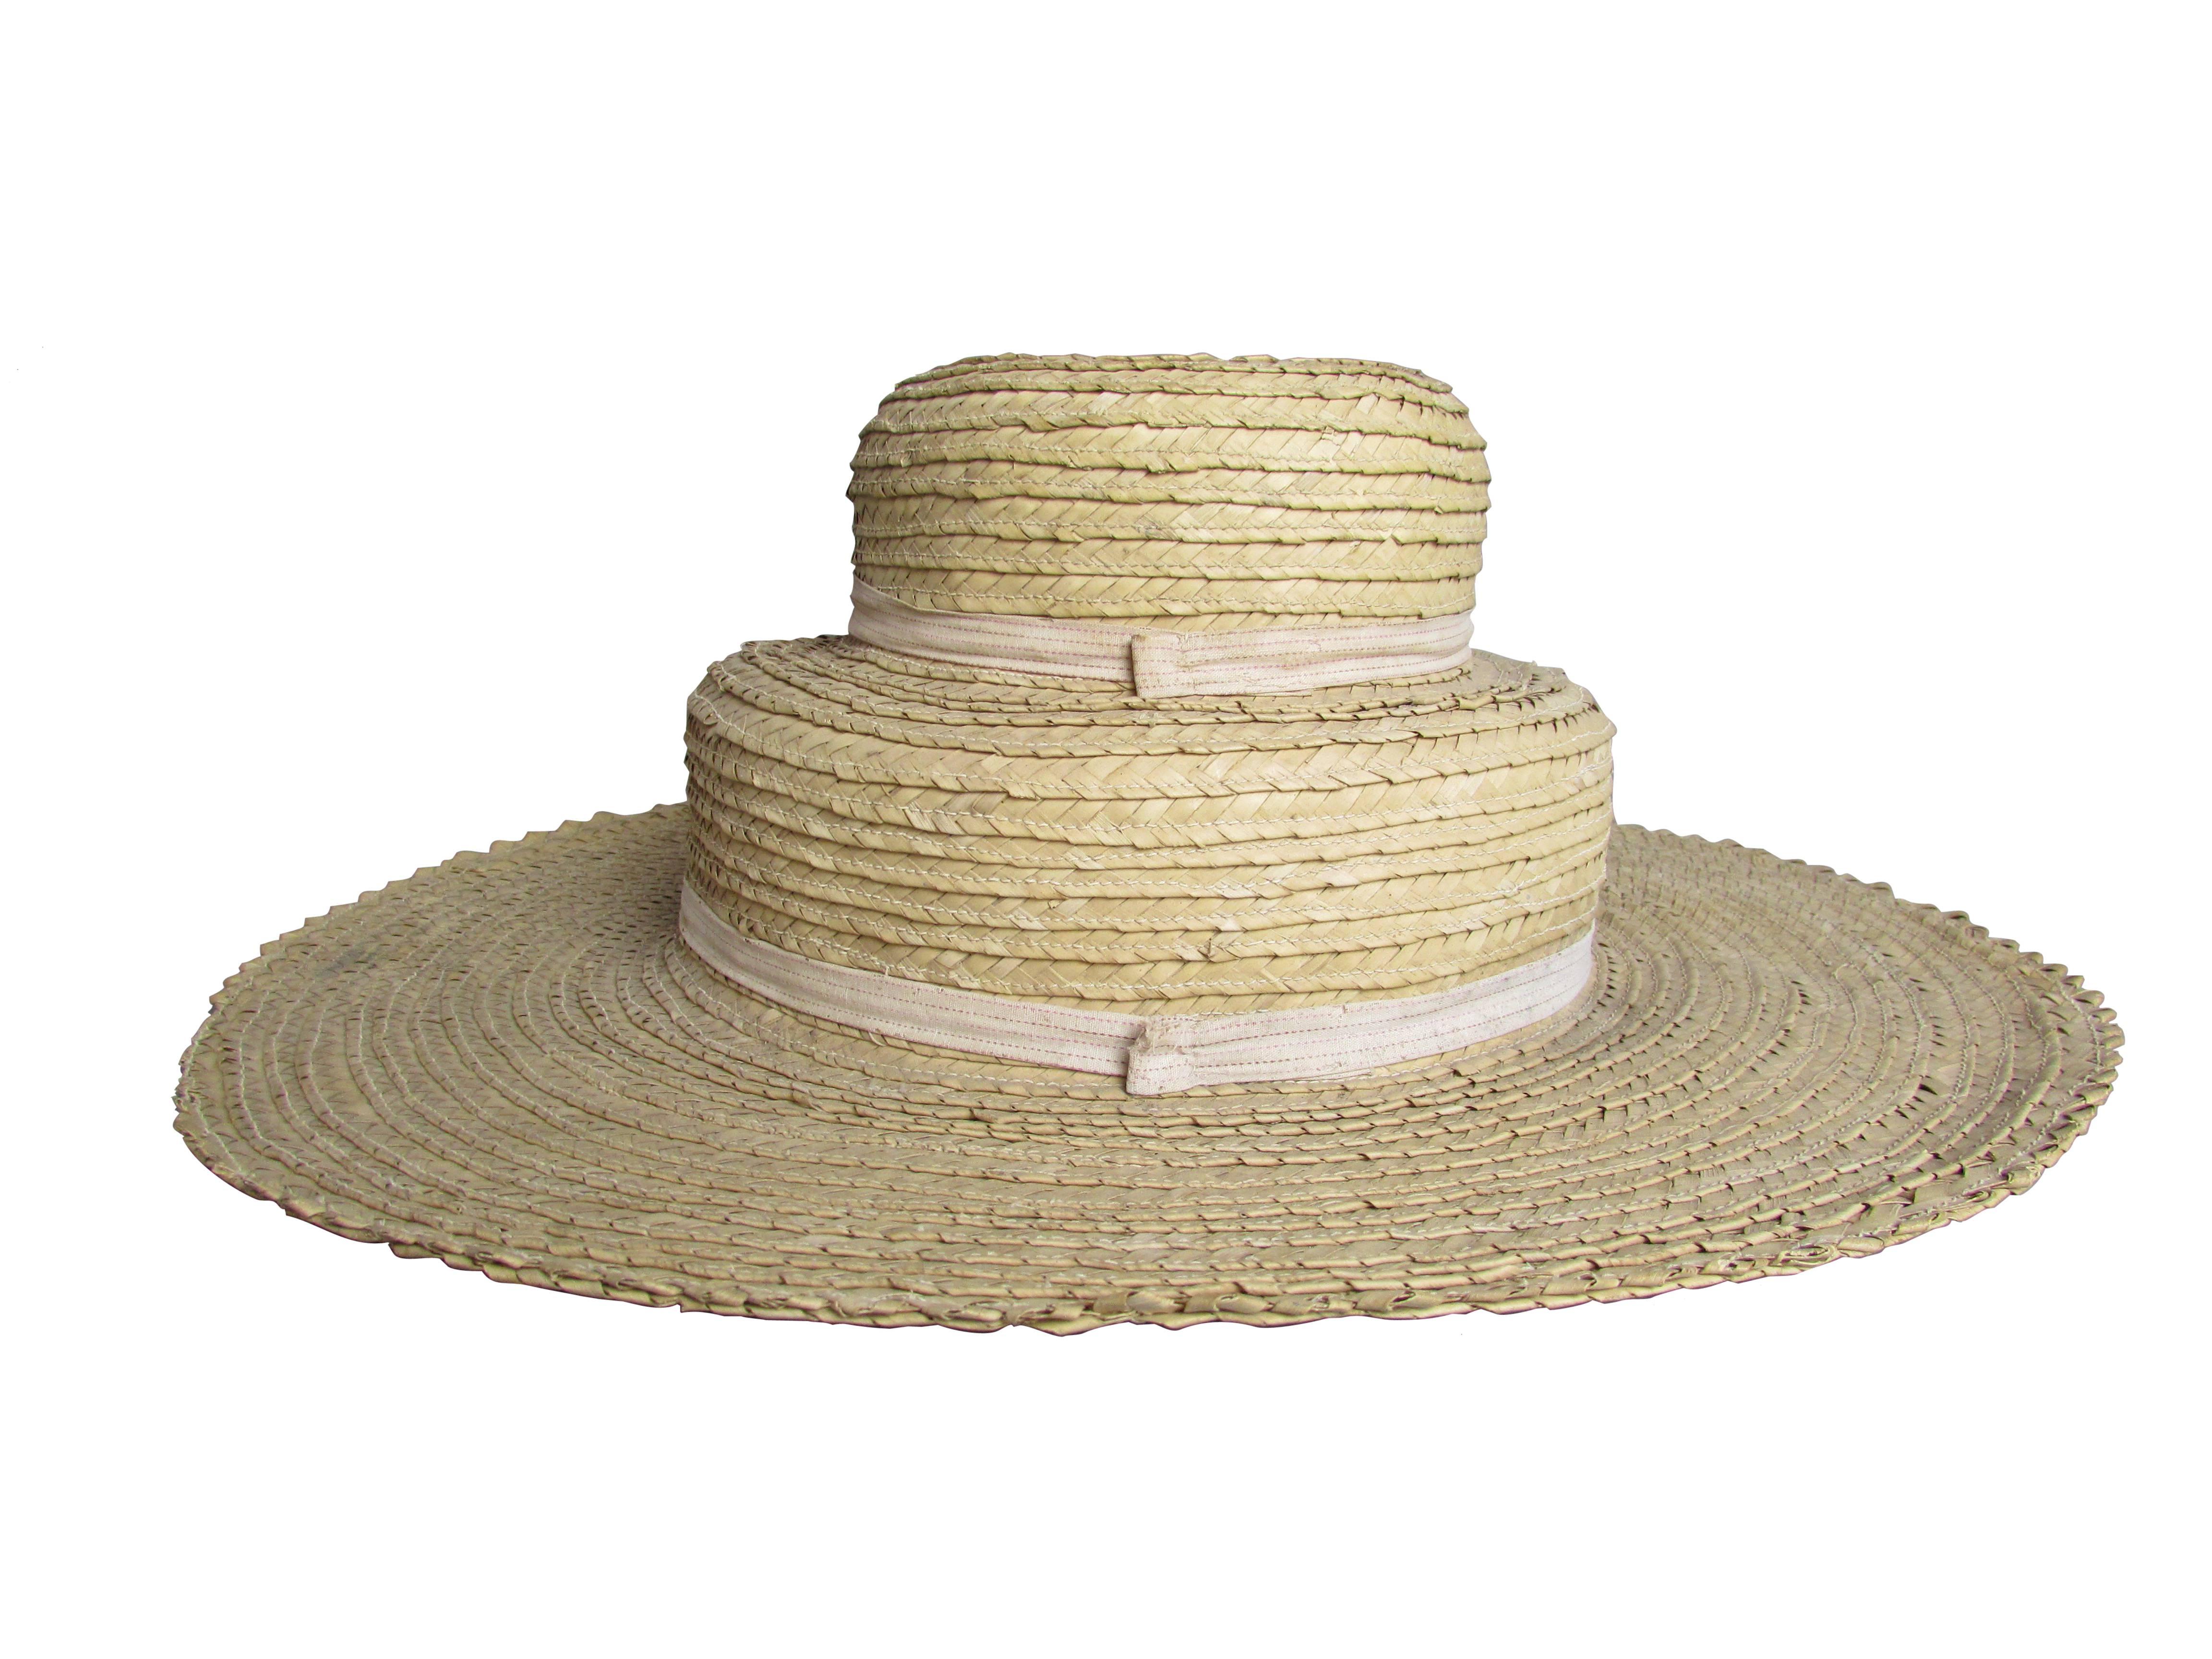 This is an unusual handmade two-tiered shaker hat. The underside of the hat is uniquely constructed with a linen wrapped headband and spacers.